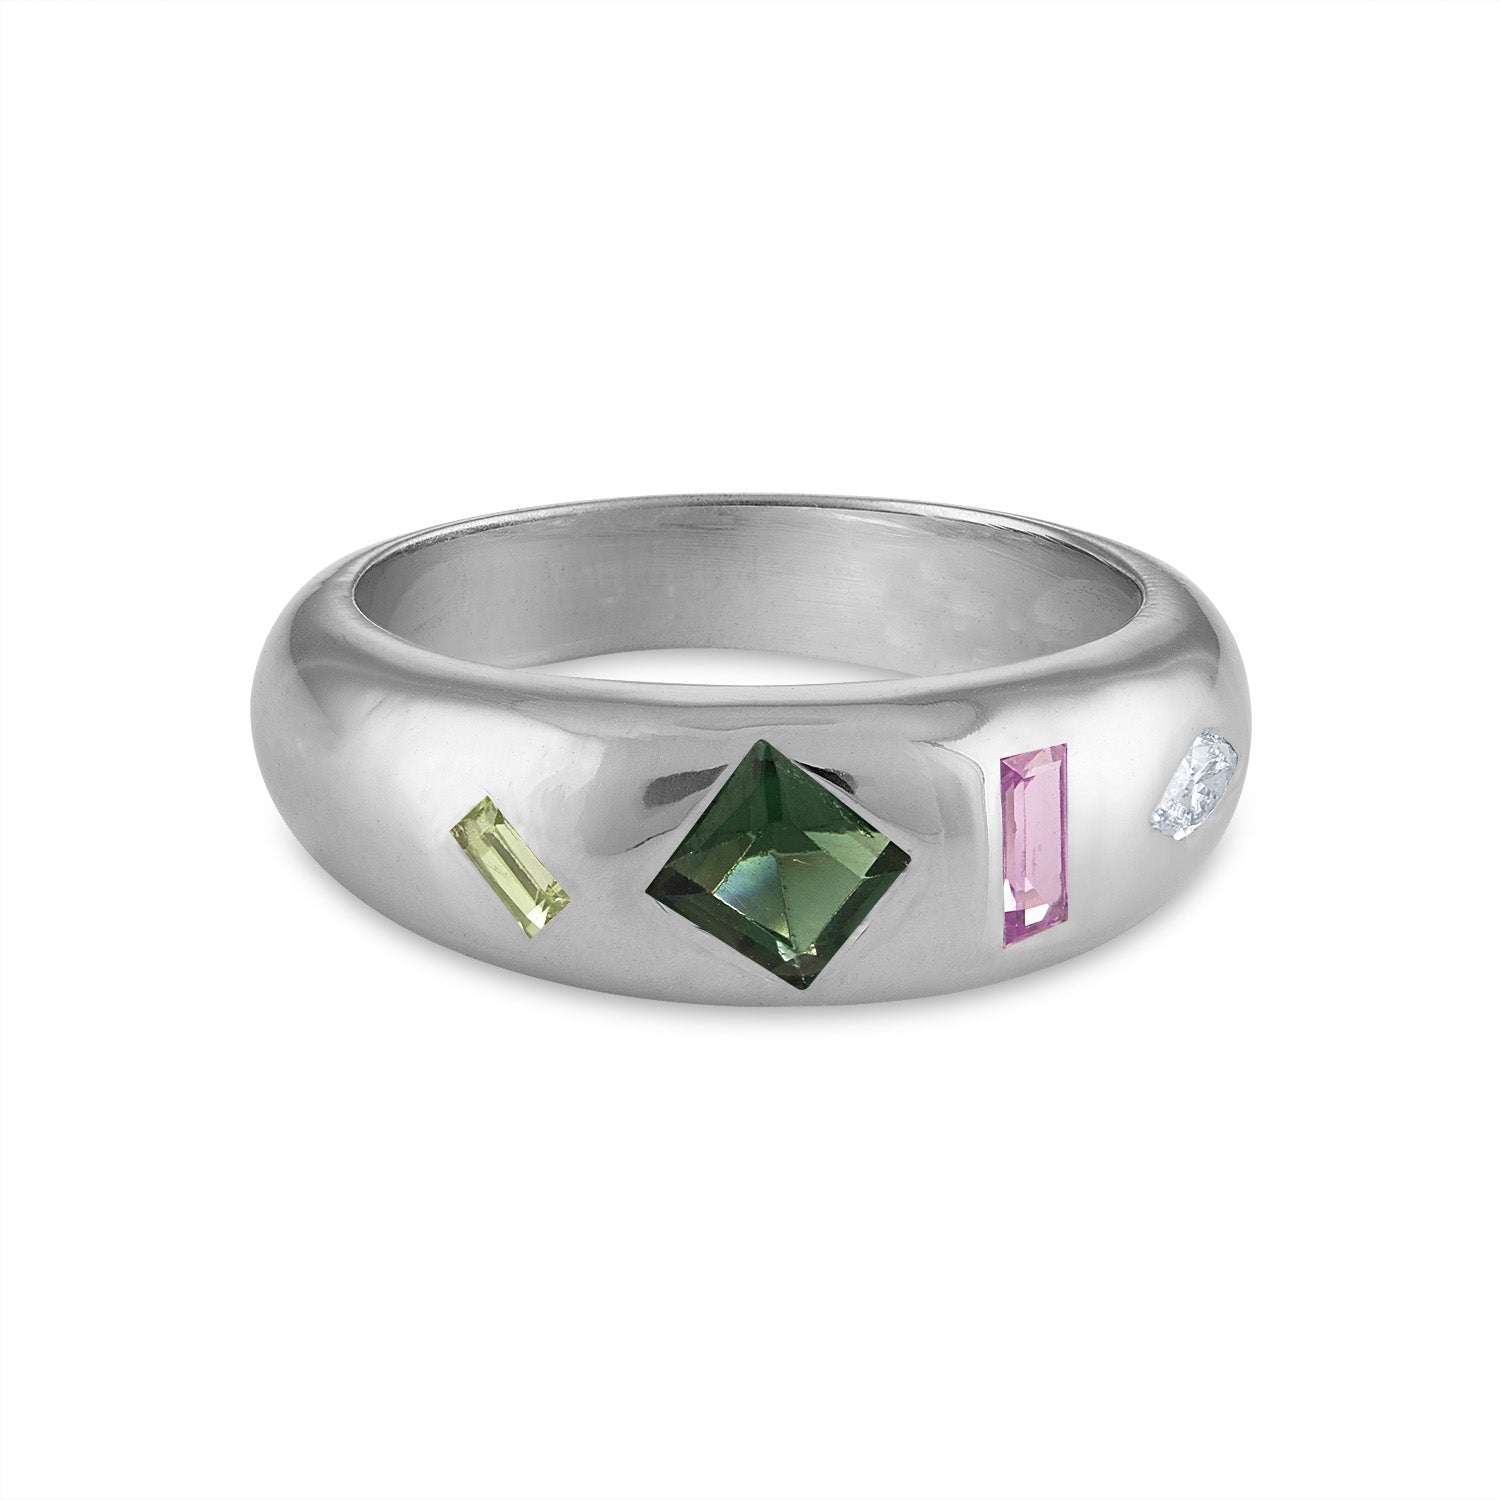 White Gold Four Stone  Dome Ring with Diamond, Sapphire, Tourmaline and Peridot